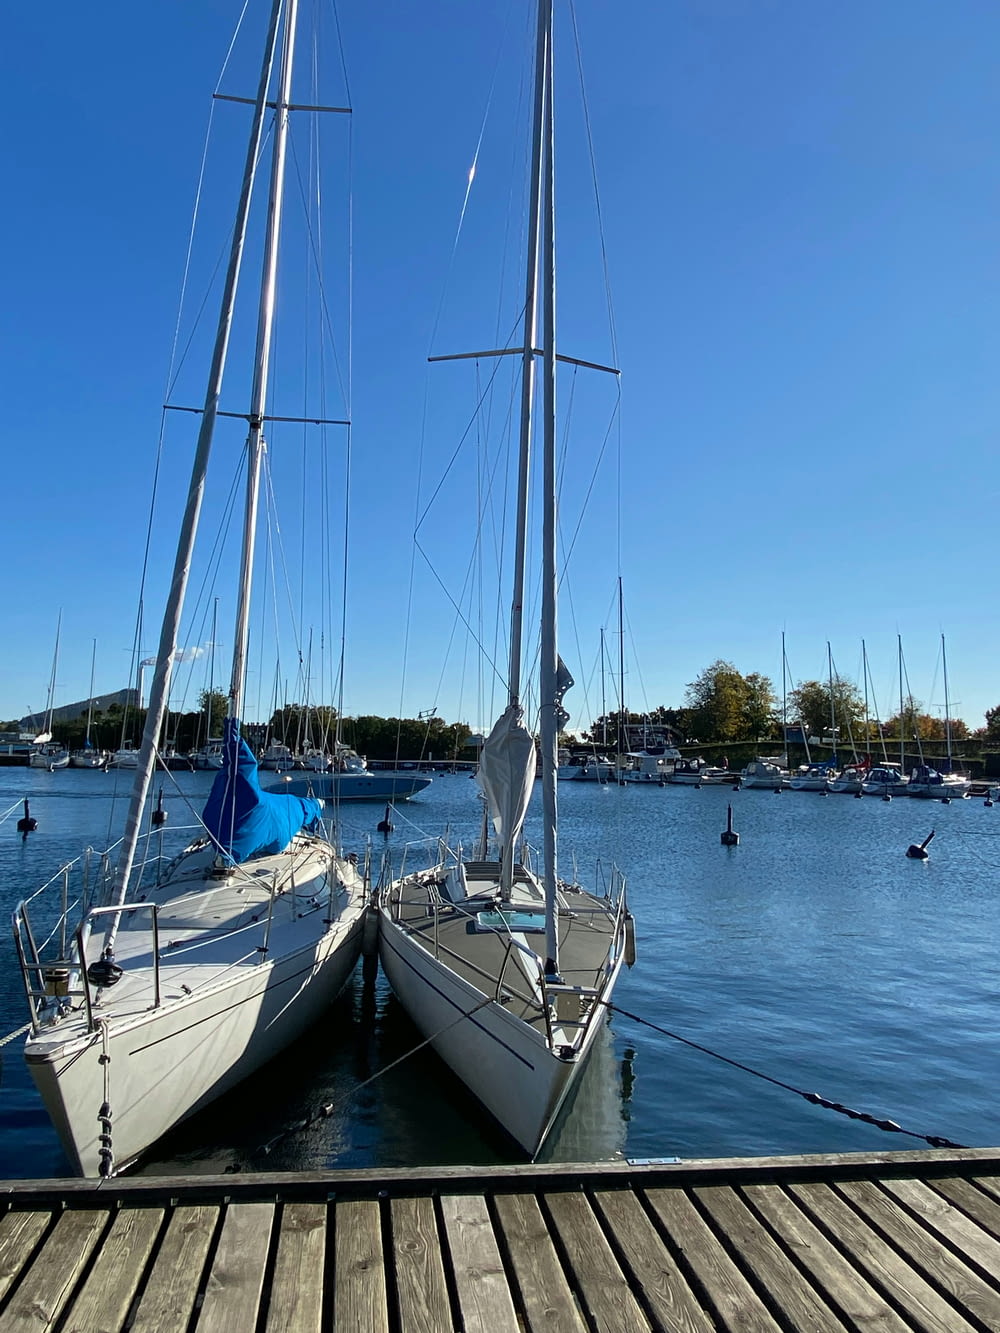 two sailboats docked at a dock on a sunny day